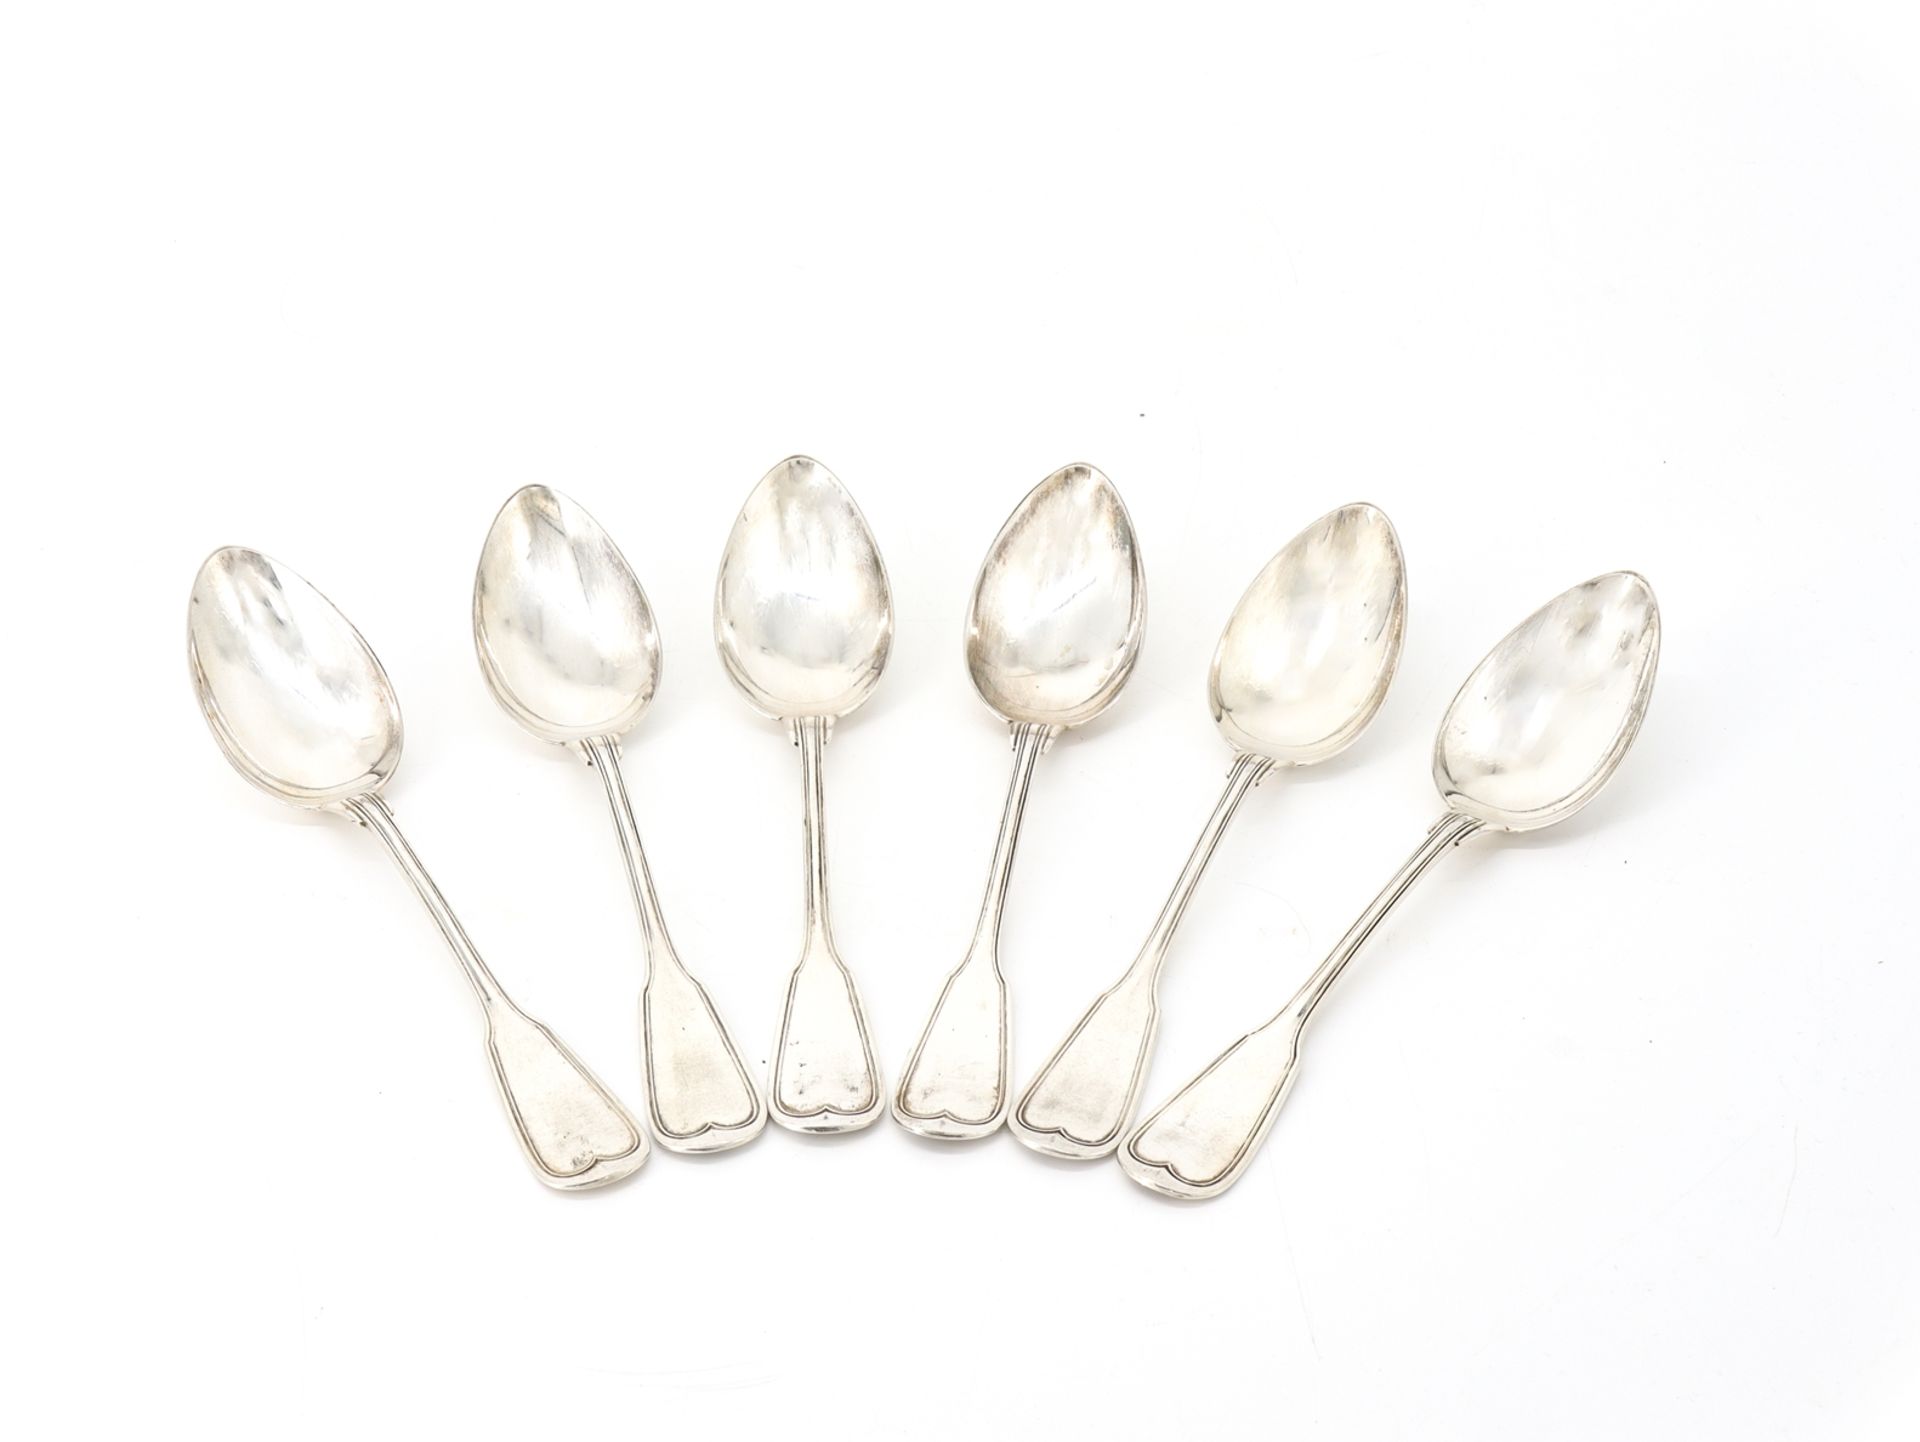 6 large silver spoons, Augsburg thread, 800 silver, around 1880